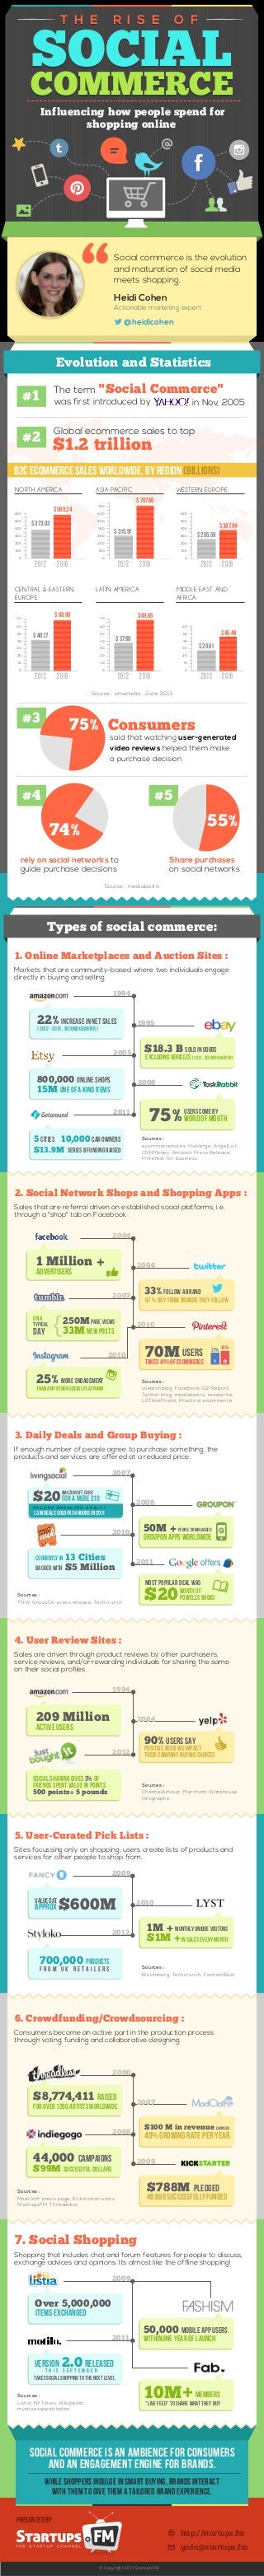 7. Social Shopping
Shopping that includes chat and forum features for people to discuss,
exchange advices and opinions. Its almost like the offline shopping!
2009
2011
Over 5,000,000
2.0version released
50,000 mobile app users
Takes Social Shopping To The Next Level
t h i s S e p t e m b e r
Members
“Live feed” to share what they buy
10M
within one year of launch
Items exchanged
6. Crowdfunding/Crowdsourcing :
Consumers become an active part in the production process
through voting, funding and collaborative designing.
5. User-Curated Pick Lists :
Sites focussing only on shopping; users create lists of products and
services for other people to shop from.
2009
2012
2010
$600MValued at
f r o m U K r e t a i l e r s
700,000 products
1M + monthly unique visitors
$1M +in sales every month
Approx
4. User Review Sites :
Sales are driven through product reviews by other purchasers,
service reviews, and/or rewarding individuals for sharing the same
on their social profiles.
1994
2012
2004209 Million
500 points= 5 pounds
Active users
Social sharing gives 3% of
friends spent value in points
3. Daily Deals and Group Buying :
If enough number of people agree to purchase something, the
products and services are offered at a reduced price.
SOCIAL
COMMERCE
T H E R I S E O F
SOCIAL
COMMERCE
T H E R I S E O F
Evolution and Statistics
Social commerce is the evolution
and maturation of social media
meets shopping.
Actionable marketing expert
@heidicohen
Heidi Cohen
Types of social commerce:
"Social Commerce"
$1.2 trillion
The term
was first introduced by
Global ecommerce sales to top
in Nov, 2005#1
#2
$373.03
$580.24
2012 2016
NORTH AMERICA ASIA PACIFIC
100
200
300
400
500
600
0
$315.91
$707.60
2012 2016
100
200
300
400
500
600
700
0
$255.59
$387.94
2012 2016
100
200
300
400
500
600
0
$40.17
$68.88
2012 2016
10
20
30
40
50
60
0
$37.66
$69.66
2012 2016
10
20
30
40
50
60
7070
0
$20.61
$45.49
2012 2016
10
20
30
40
50
60
0
Share purchases
on social networks
Source : emarketer, June 2013
Source : mediabistro
Consumers
said that watching user-generated
video reviews helped them make
a purchase decision
#3
#4 #5
rely on social networks to
guide purchase decisions
74%
75%
55%
WESTERN EUROPE
CENTRAL & EASTERN
EUROPE
LATIN AMERICA MIDDLE EAST AND
AFRICA
B2C eCommerce sales worldwide, by region (Billions)
1. Online Marketplaces and Auction Sites :
Markets that are community-based where two individuals engage
directly in buying and selling.
1994
2005
2011
1995
2008
22%increase in NET SALES
800,000 online shops
5
$13.9M
cities 10,000 car owners
SeriesBfundingraised
15M one of a kind items
$18.3 B sold in goods
75%users come by
Word of mouth
excluding vehicles
( 2012 - 2013 , second quarter )
( 2013 , second quarter )
2. Social Network Shops and Shopping Apps :
Sales that are referral driven on established social platforms; i.e.
through a "shop" tab on Facebook.
2004
2007
2006
2010
2010
1 Million +
250M Page views
25%
33%Follow a brand
more engagement
than any other social platform
70M users
33M New posts
67 % buy from brands they follow
Takes 41% of ecommerce
Advertisers
{Typical
Day
on a
41%37%
2000
2008
2007
2009
$8,774,411 raised
44,000 campaigns
$99M successful dollars
$788M pledged
$100 M in revenue (2012)
40% growing rate per year
48,606 successfully funded
for over 1200 artists worldwide
2007
2010
2008
2011
$20Amazon gift Card
13 CitiesCurrently in
1.3 m Deals sold in 24 hours in 2011
$5 Millionbacked with
50M +people Downloaded
most popular deal was
$20
Groupon Apps Worldwide
worth of
Powell's Books
for a mere $10
positive reviews impact
their company buying choices
90%USERS SAY
+
Presented by
© Copyright 2013 StartupsFM
R E C O R D B R E A K I N G D E A L ! ! !
ecommercebytes, theVerge, AngelList,
CNNMoney, Amazon Press Release,
Pinterest for business
Sources :
ysearchblog, Facebook-Q2 Report,
Twitter blog, mediabistro, readwrite,
L2ThinkThank, Practical ecommerce
Sources :
Sources :
ChannelAdvisor, Merchant Warehouse
Infographic
Bloomberg, Techcrunch, FashionBust
Sources :
TNW, GroupOn press release, Techcrunch
Sources :
Modcloth press page, Kickstarter stats,
StartupsFM, Threadless
Sources :
Listia, NYTimes, Wikipedia
myshoesspeakitalian
Sources :
http://startups.fm
yoda@startups.fm
Influencing how people spend for
shopping online
Social Commerce is an ambience for consumers
and an engagement engine for brands.
While shoppers indulge in smart buying, brands interact
with them to give them a tailored brand experience.
 